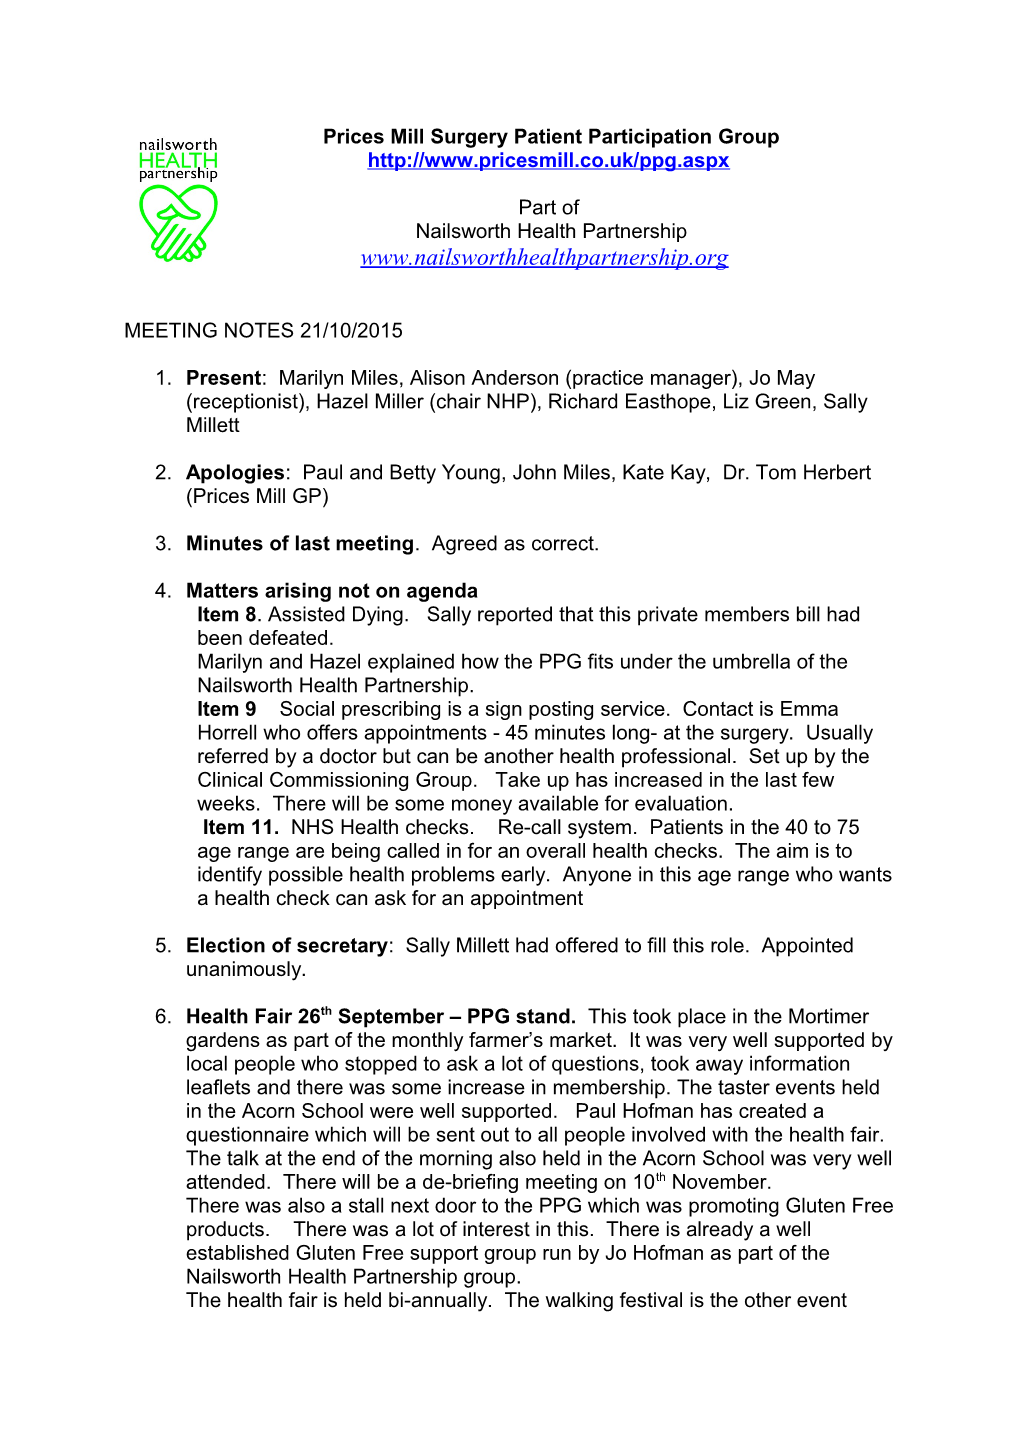 Meeting Notes 21/10/2015